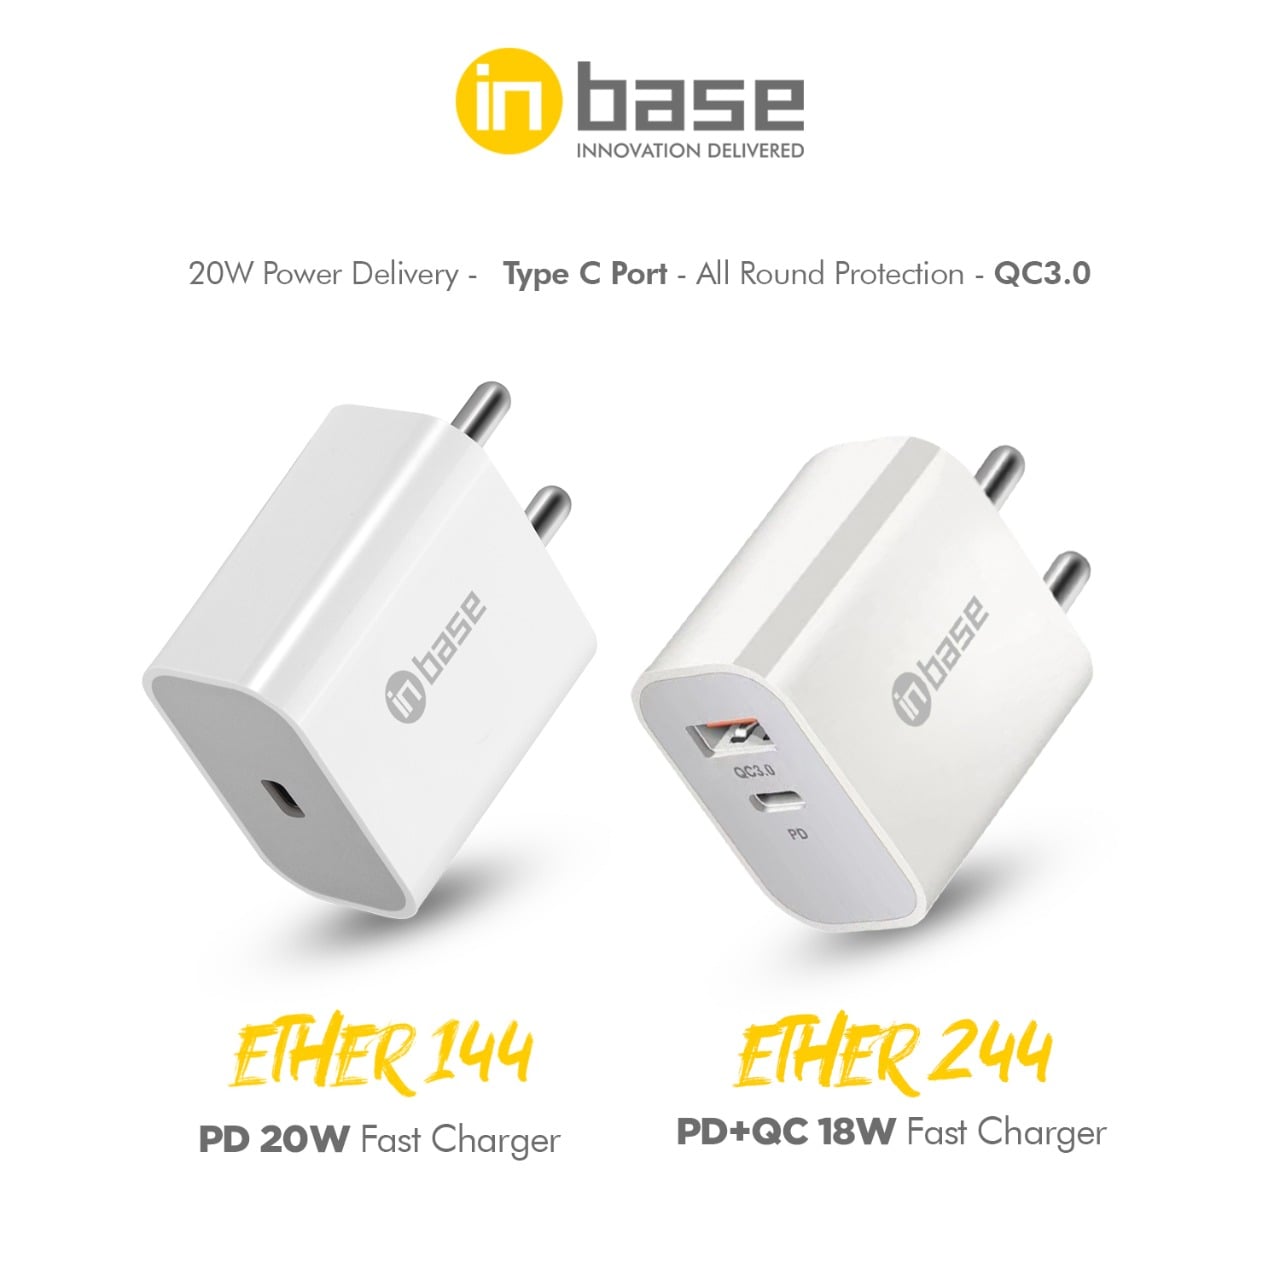 Inbase Ether 144 and 244 Fast Chargers min